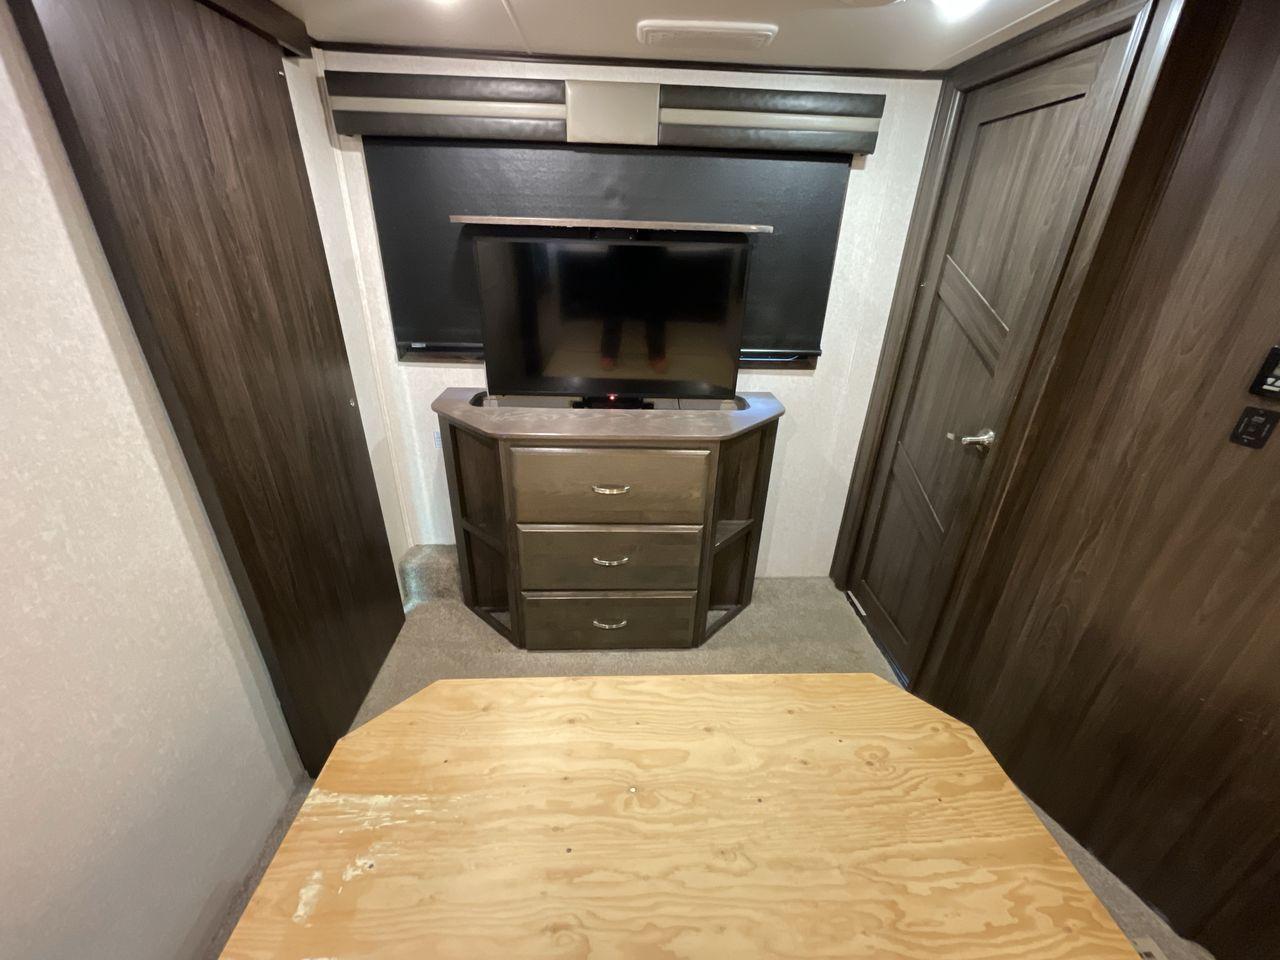 2018 GRAY JAYCO SEISMIC 4250 - (1UJCJSCV5J1) , Length: 44.92 ft. | Dry Weight: 15,570 lbs. | Gross Weight: 20,000 lbs. | Slides: 3 transmission, located at 4319 N Main St, Cleburne, TX, 76033, (817) 678-5133, 32.385960, -97.391212 - Set out to the great outdoors in this 2018 Jayco Seismic 4250 and enjoy all its amenities! This toy hauler measures just a bit under 45 ft. in length and 13.32 ft. in height, providing great space and comfort. It has a dry weight of 15,570 lbs. and a GVWR of 20,000 lbs. It also comes with automatic - Photo #22